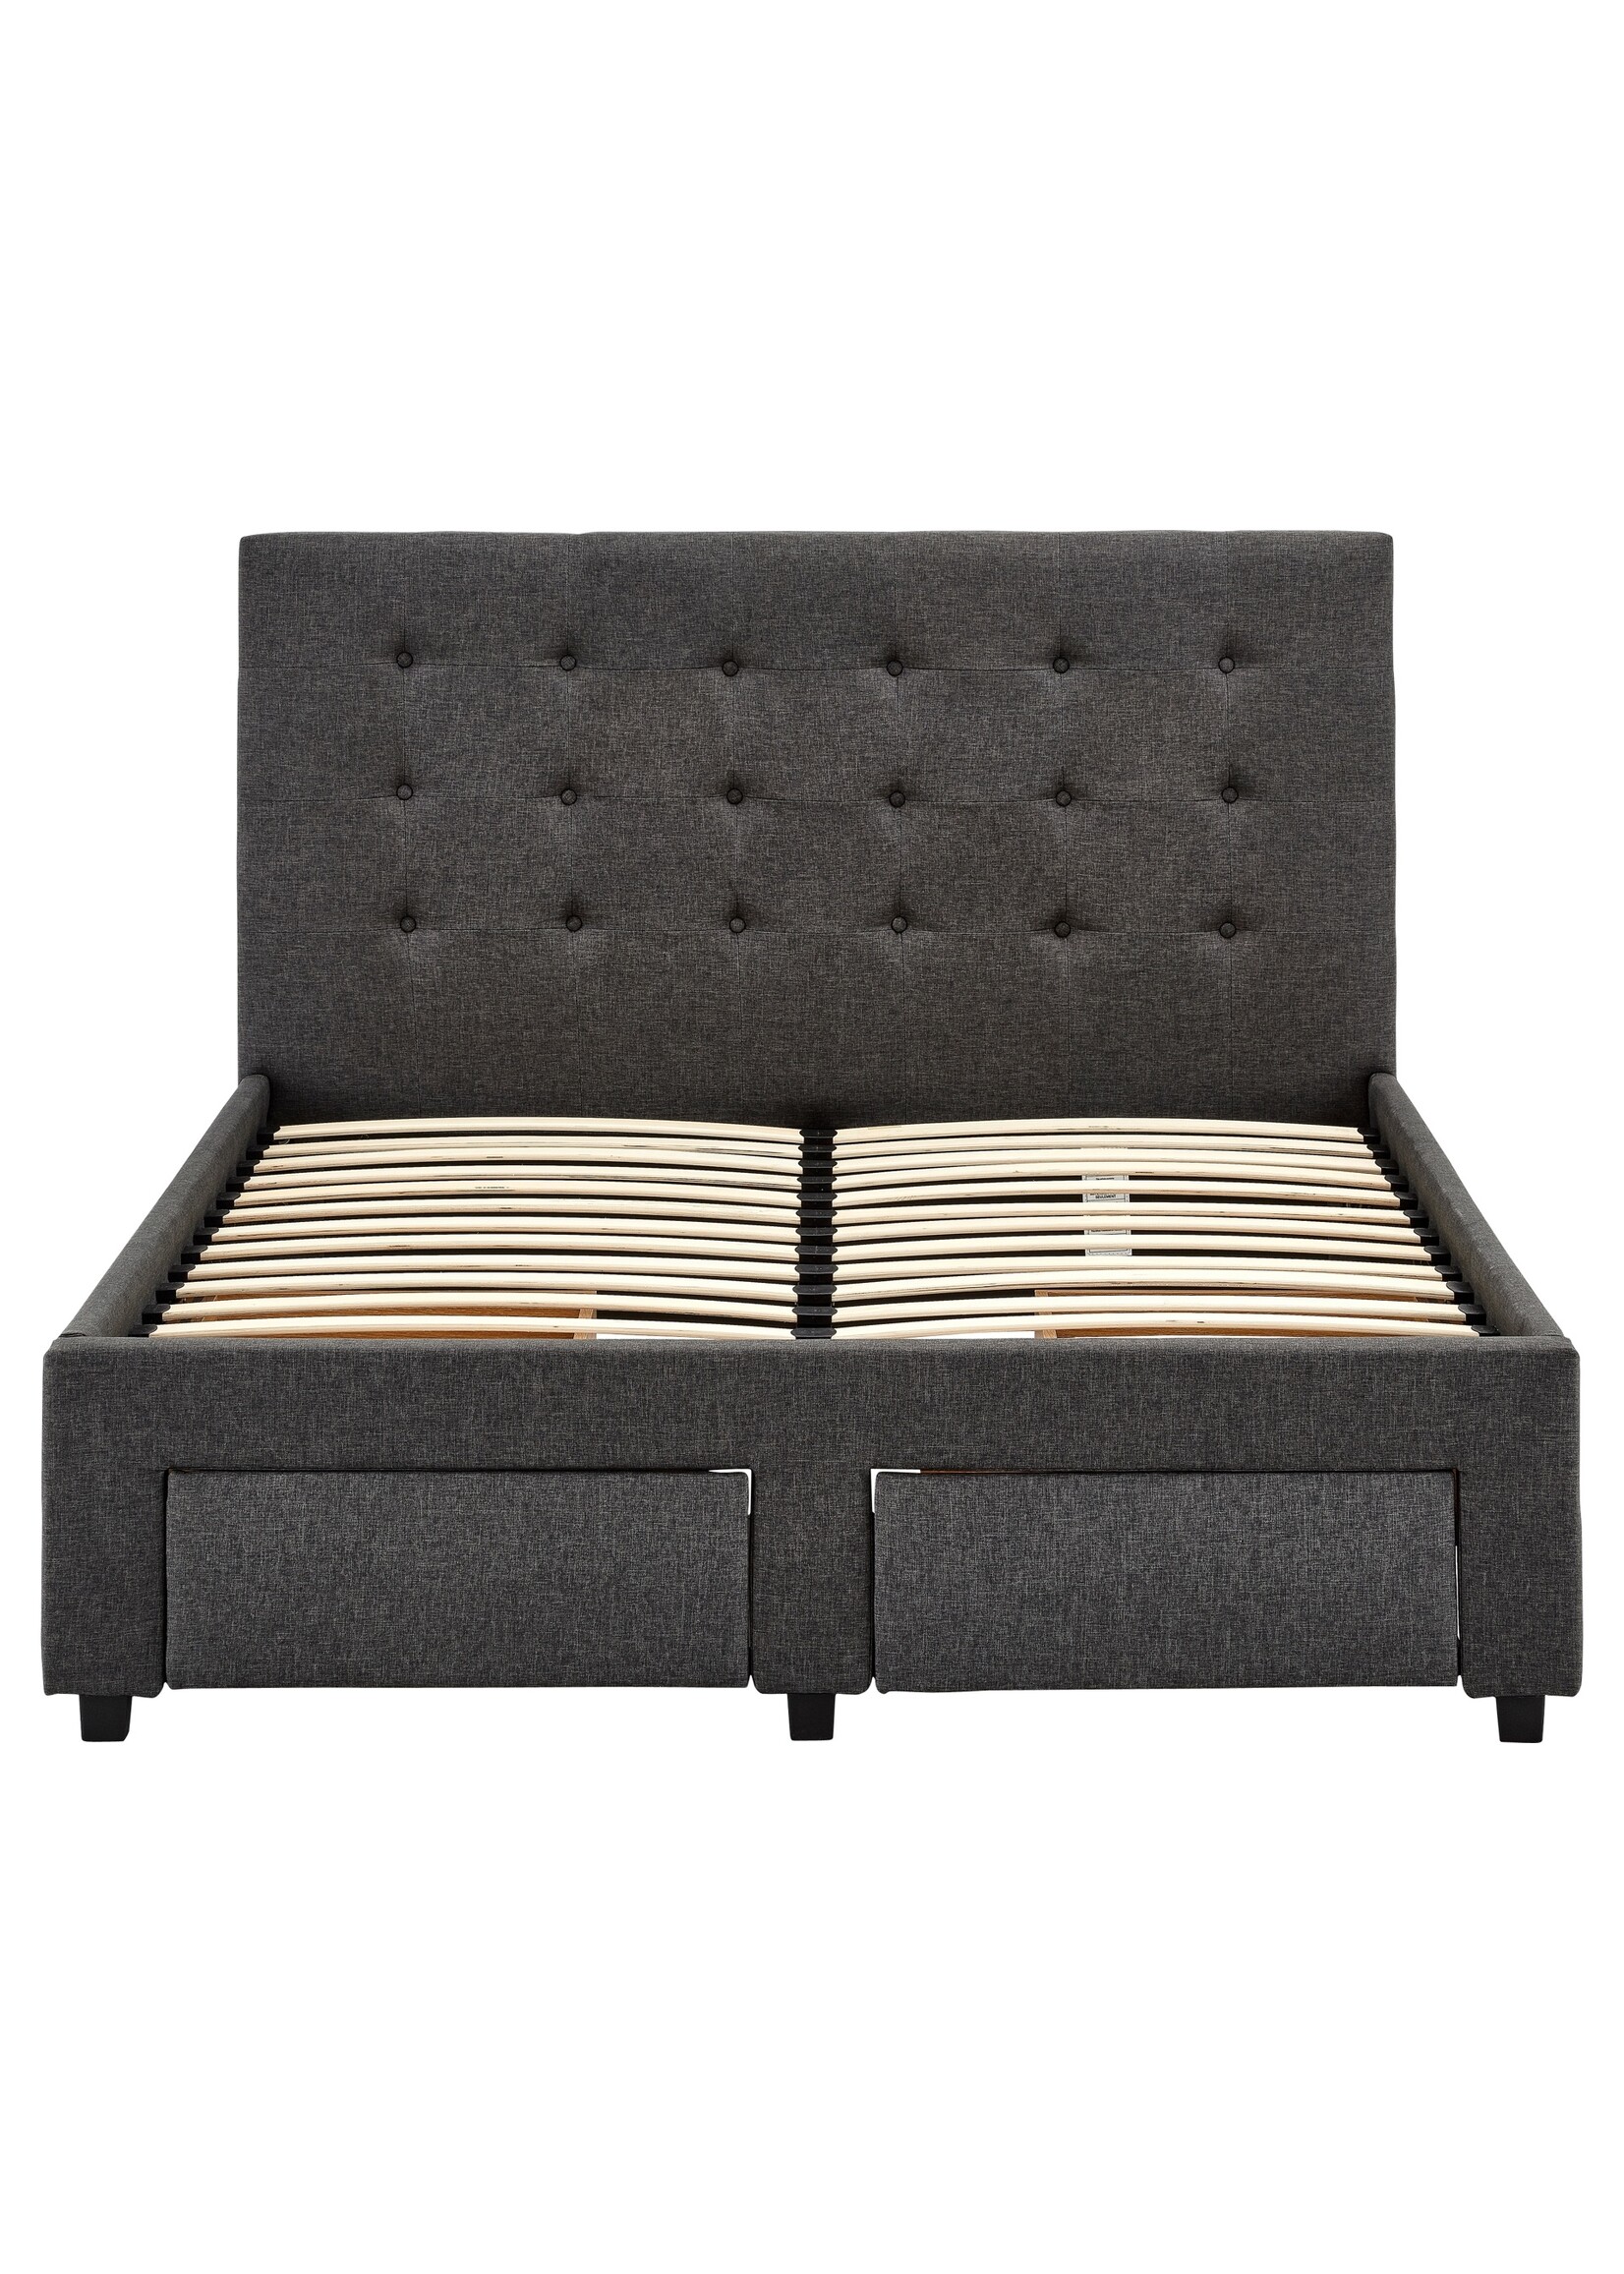 Grey Linen Upholstered Bed with Storage,